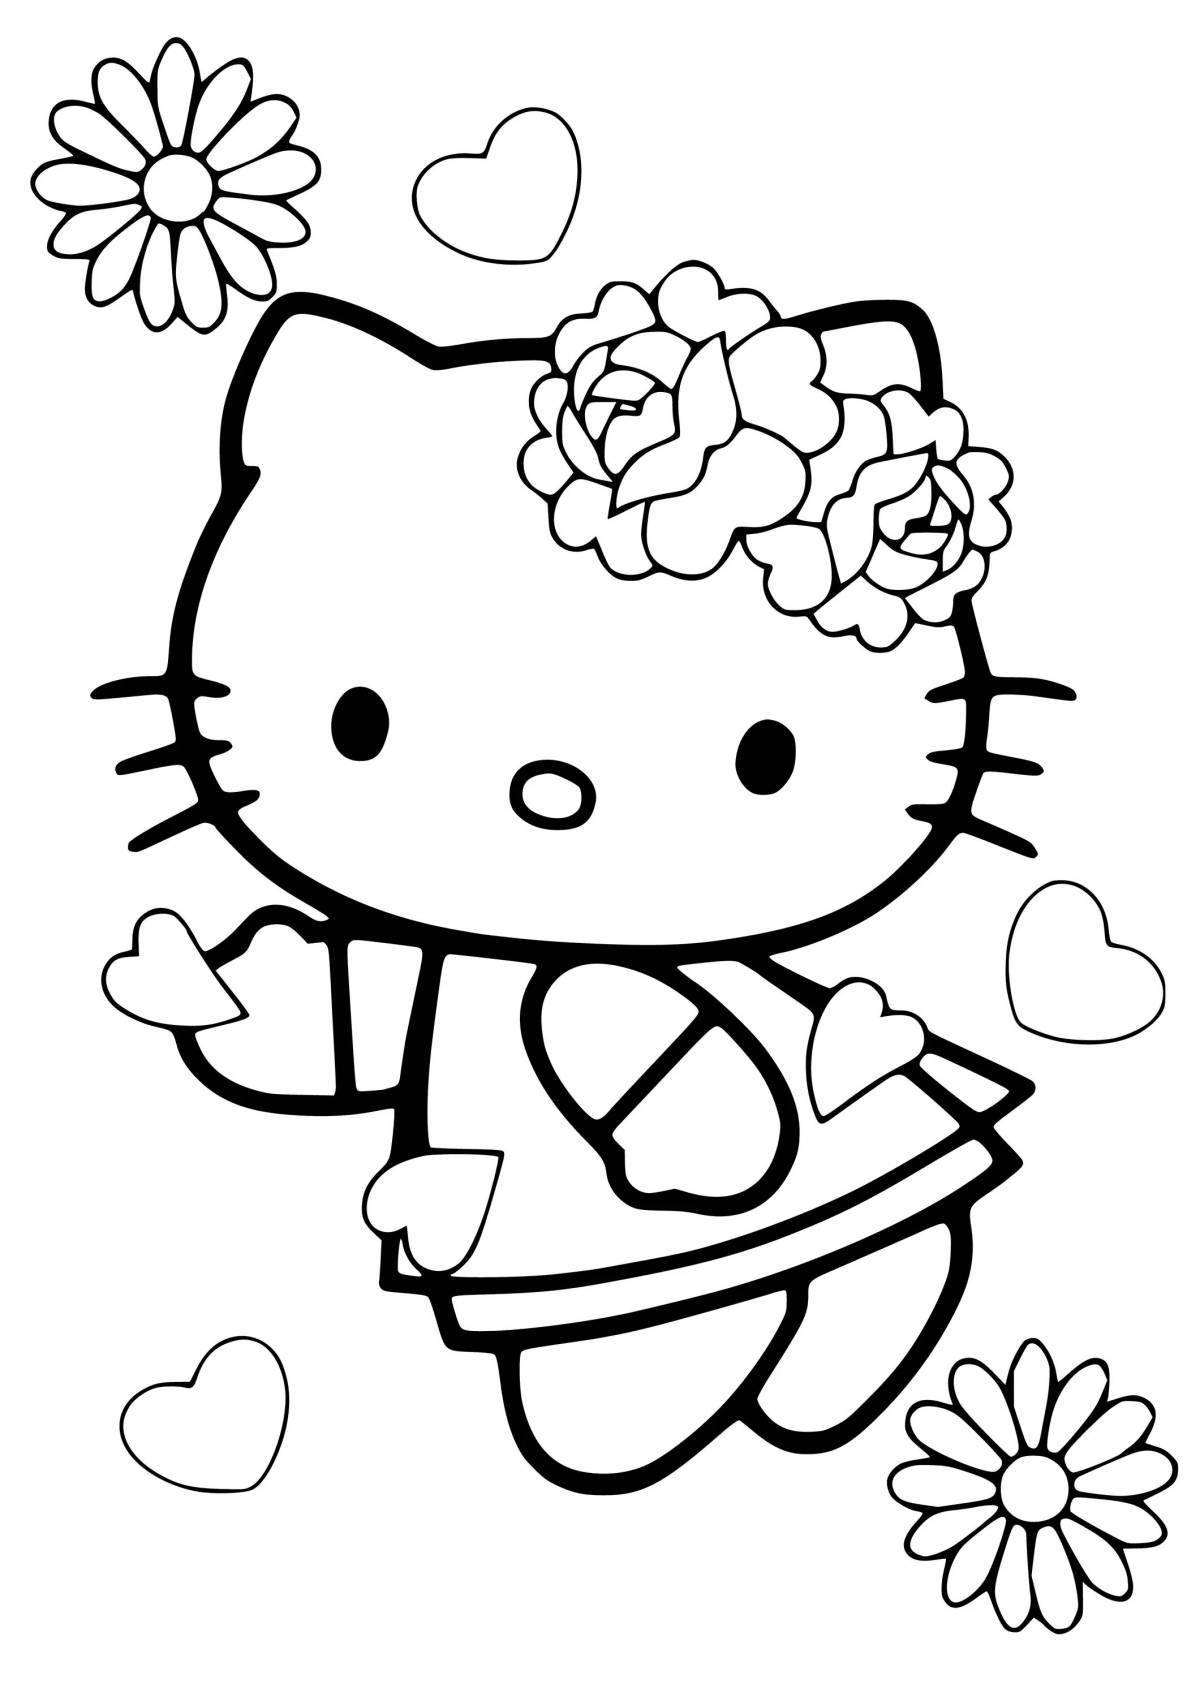 Hilarious hello kitty characters